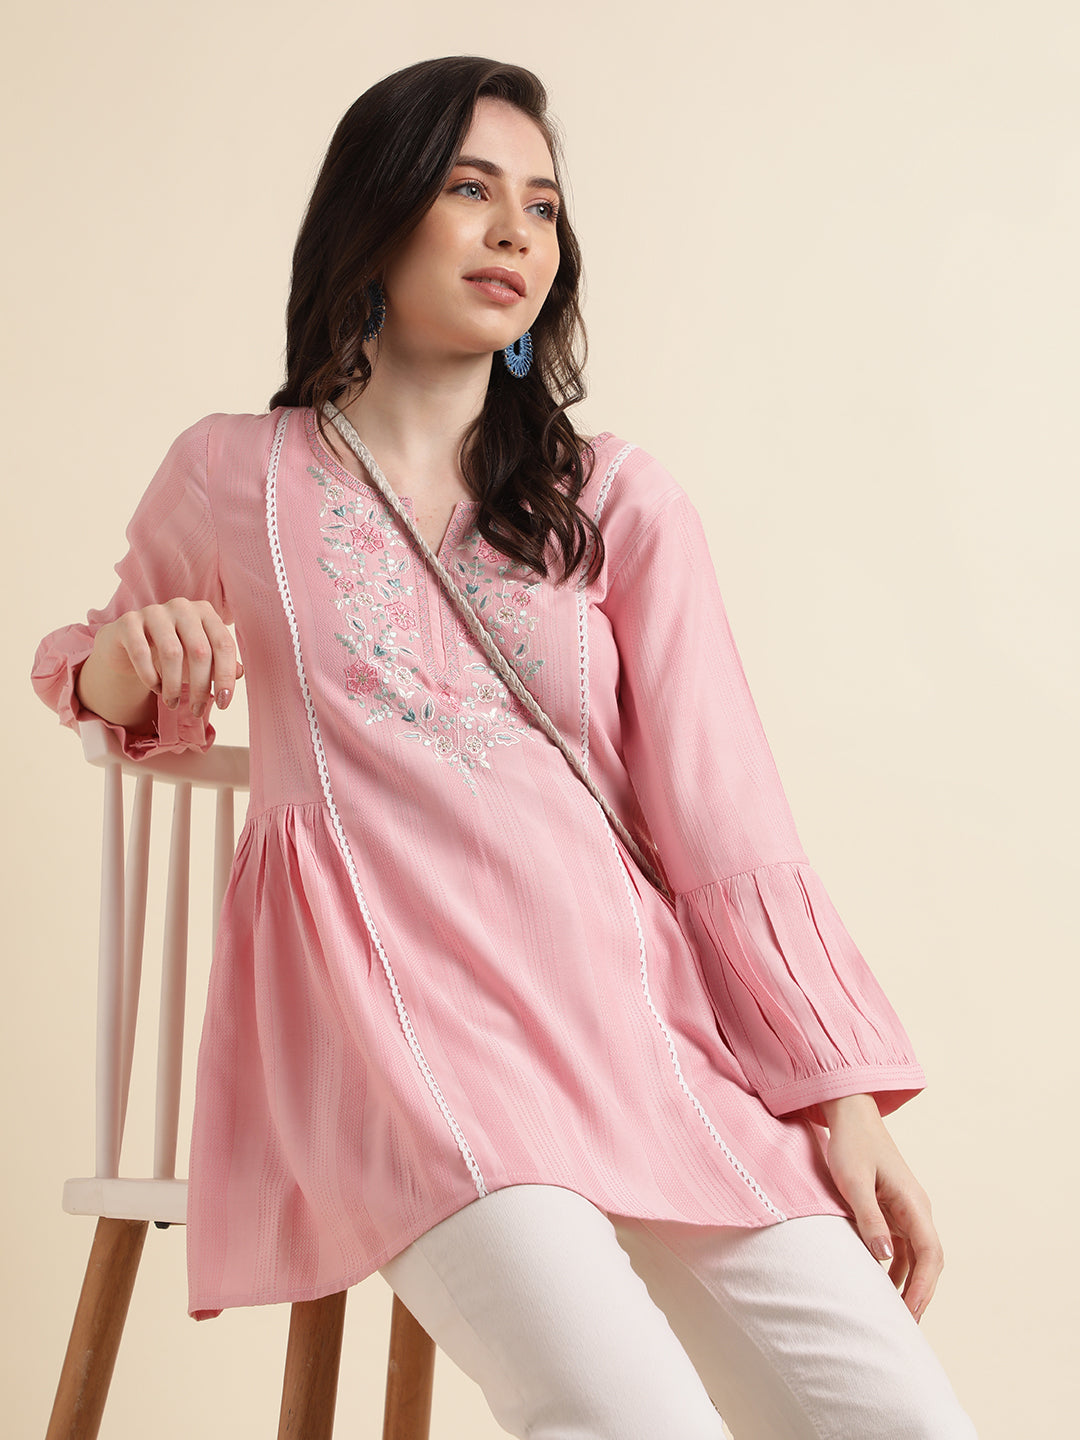 Pink Embroidered Short Top: Western Partywear Delight in Chic Style